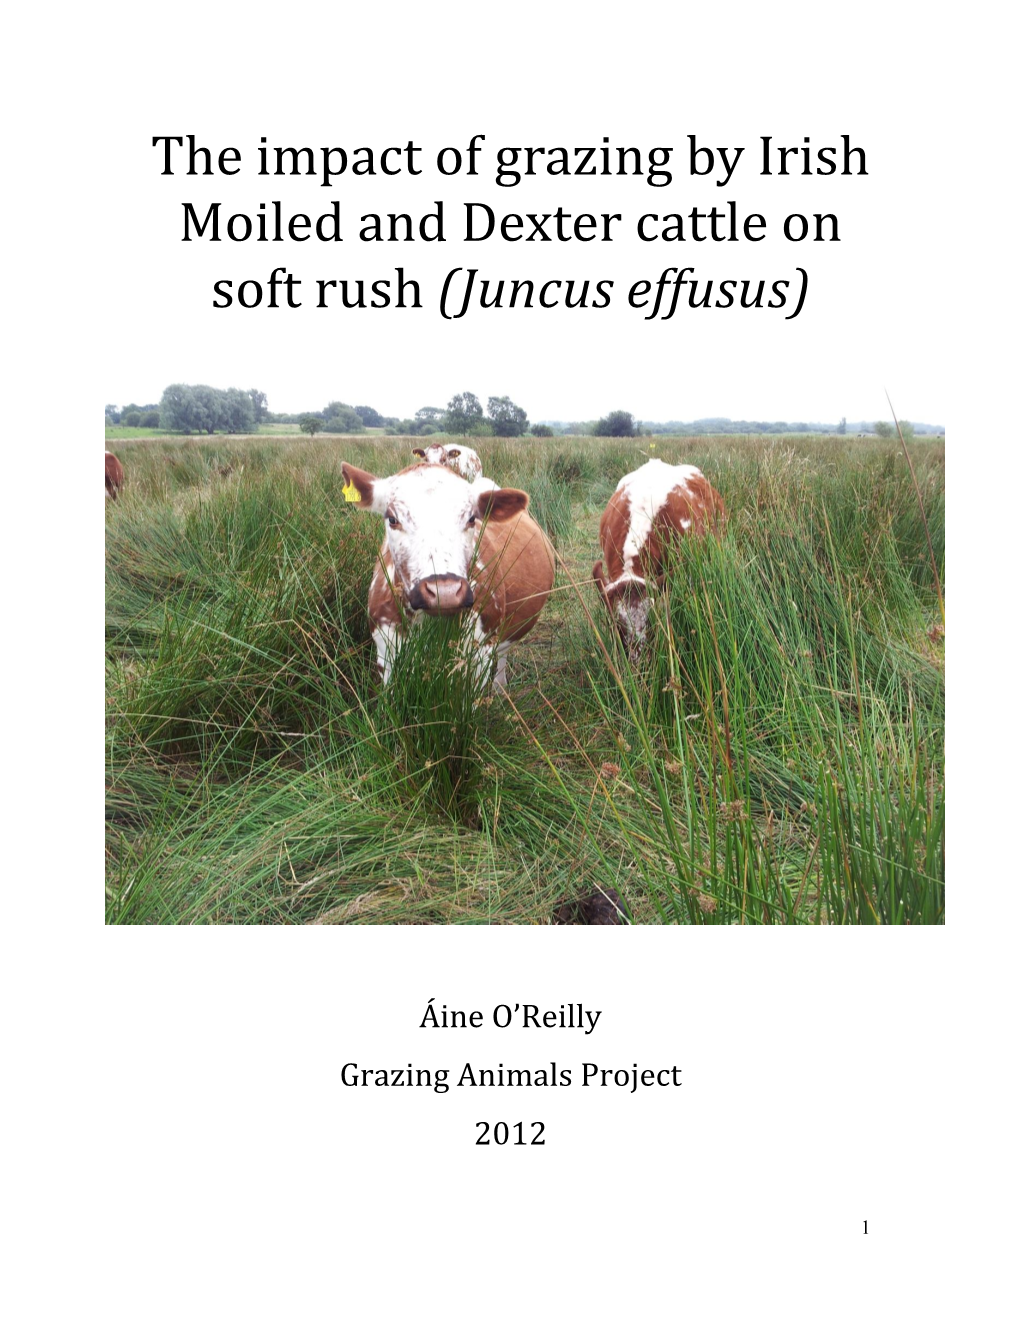 The Impact of Grazing by Irish Moiled and Dexter Cattle on Soft Rush